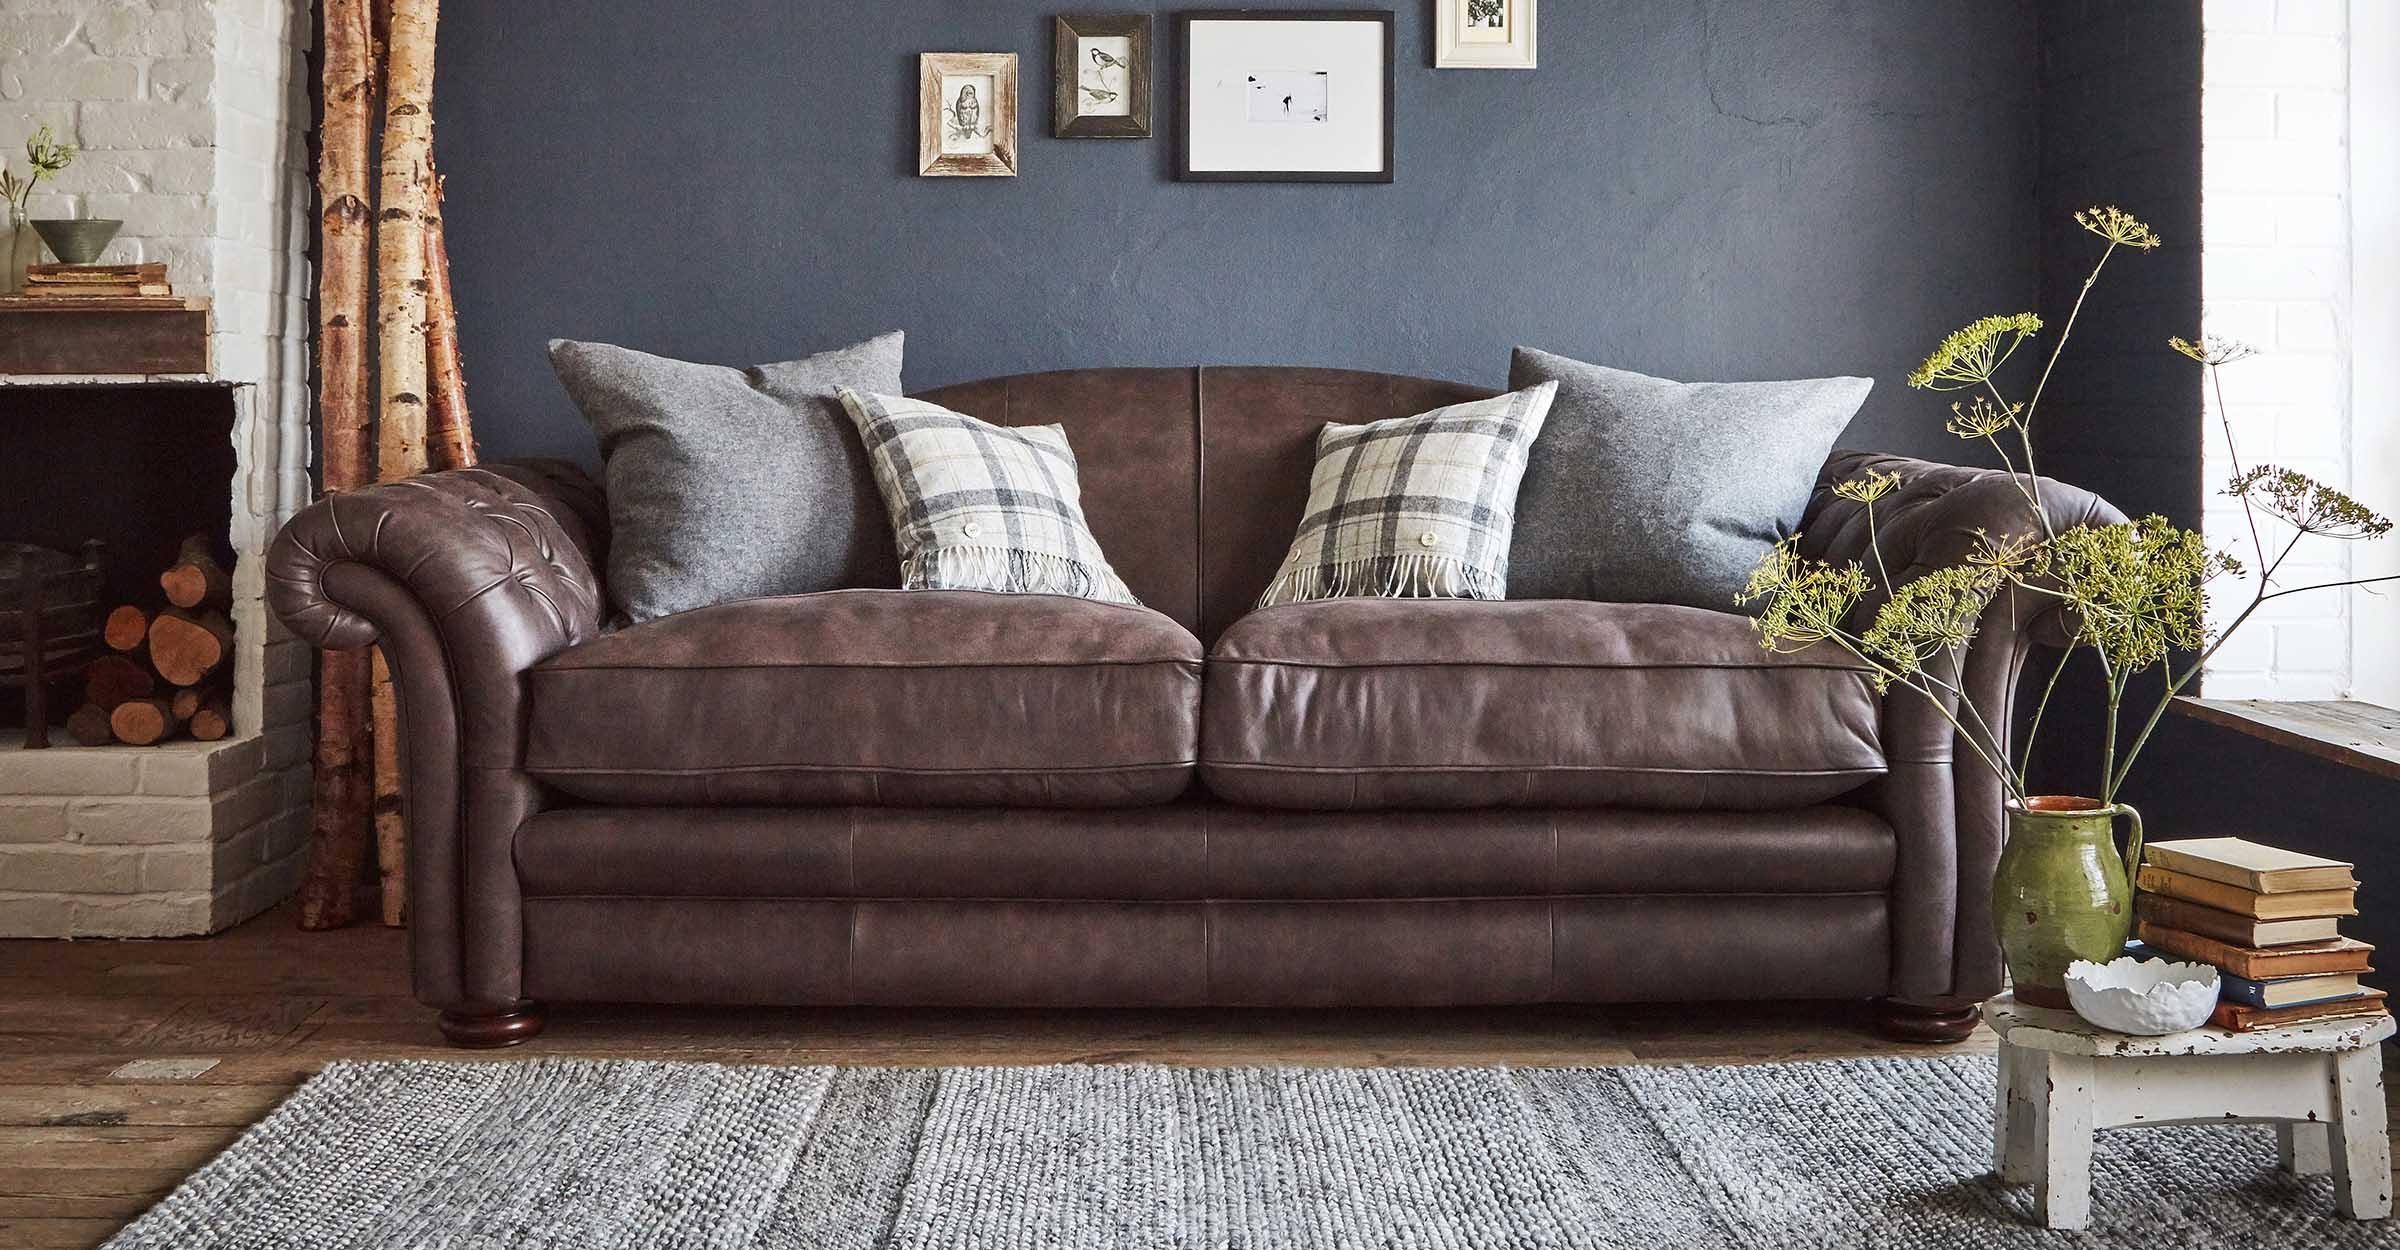 Brown Sofas Dfs, Decorating Living Room With Cognac Leather Sofa